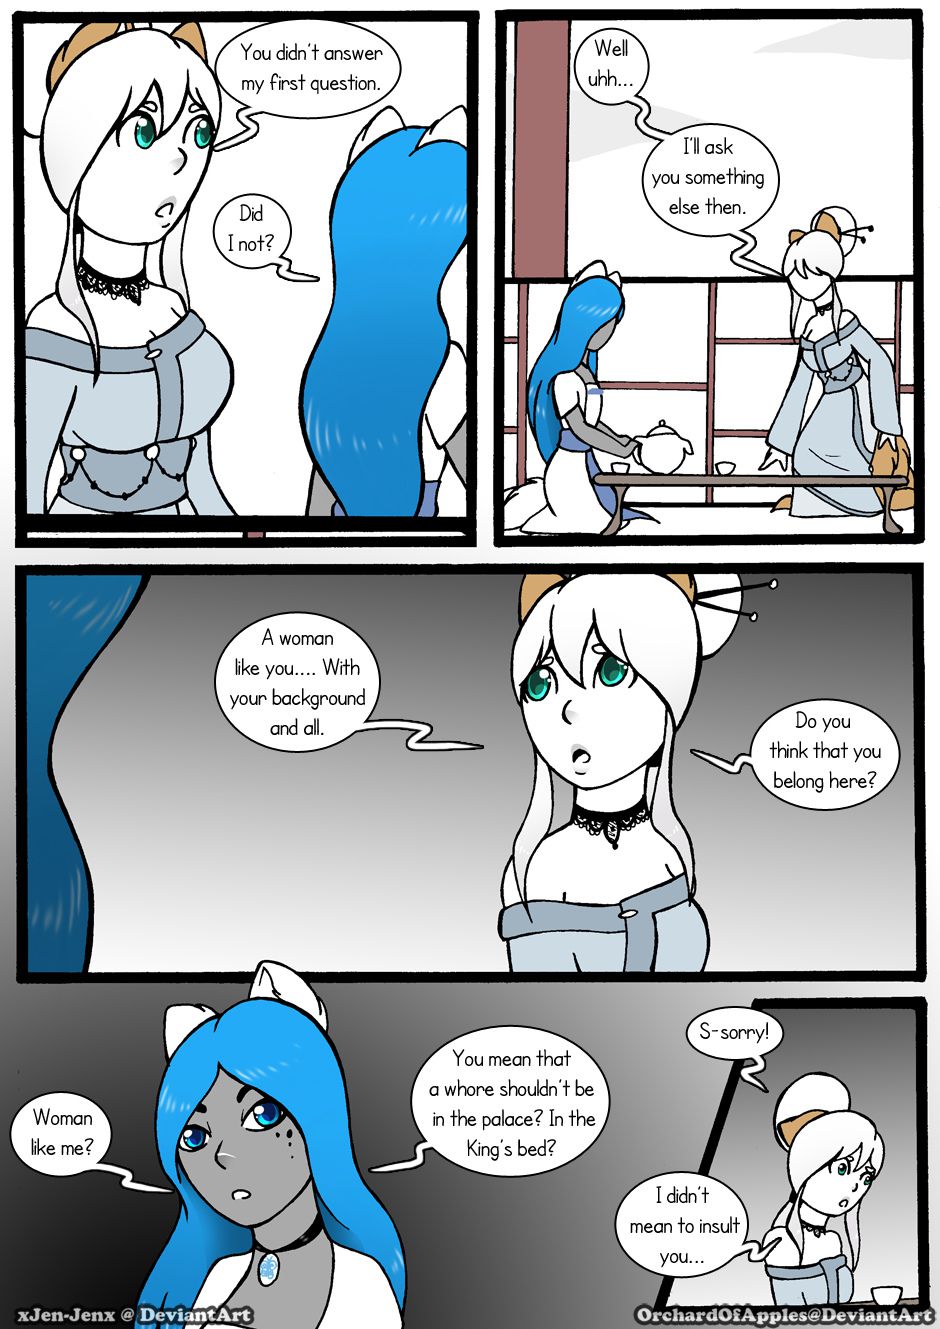 [Jeny-jen94] Between Kings and Queens [Ongoing] 216